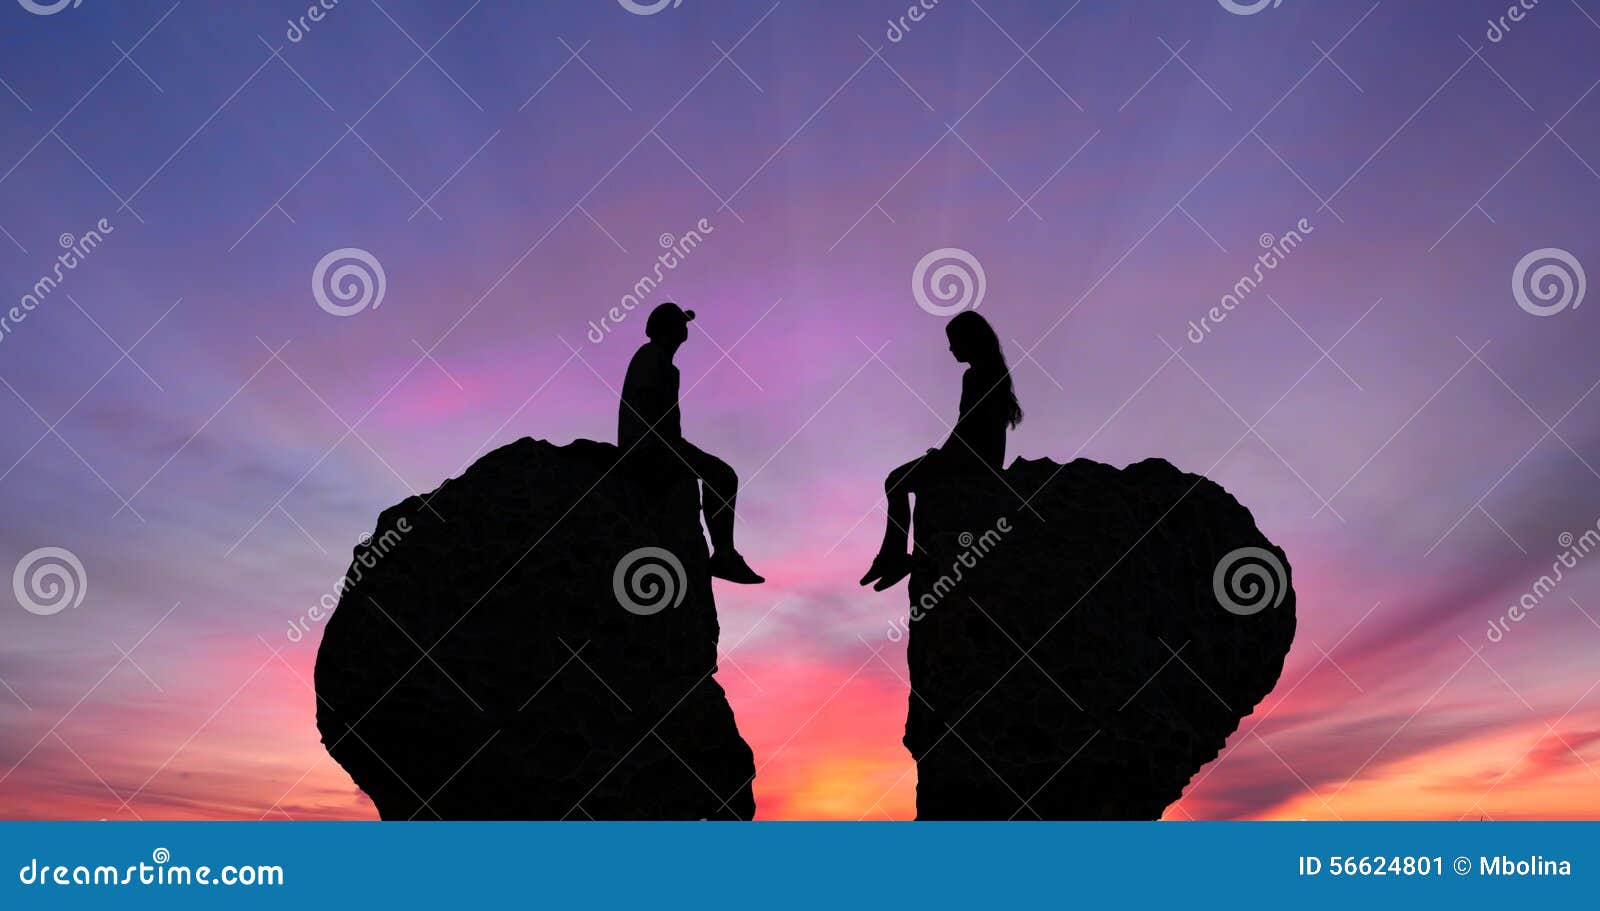 young couple in quarrel sitting on rocks